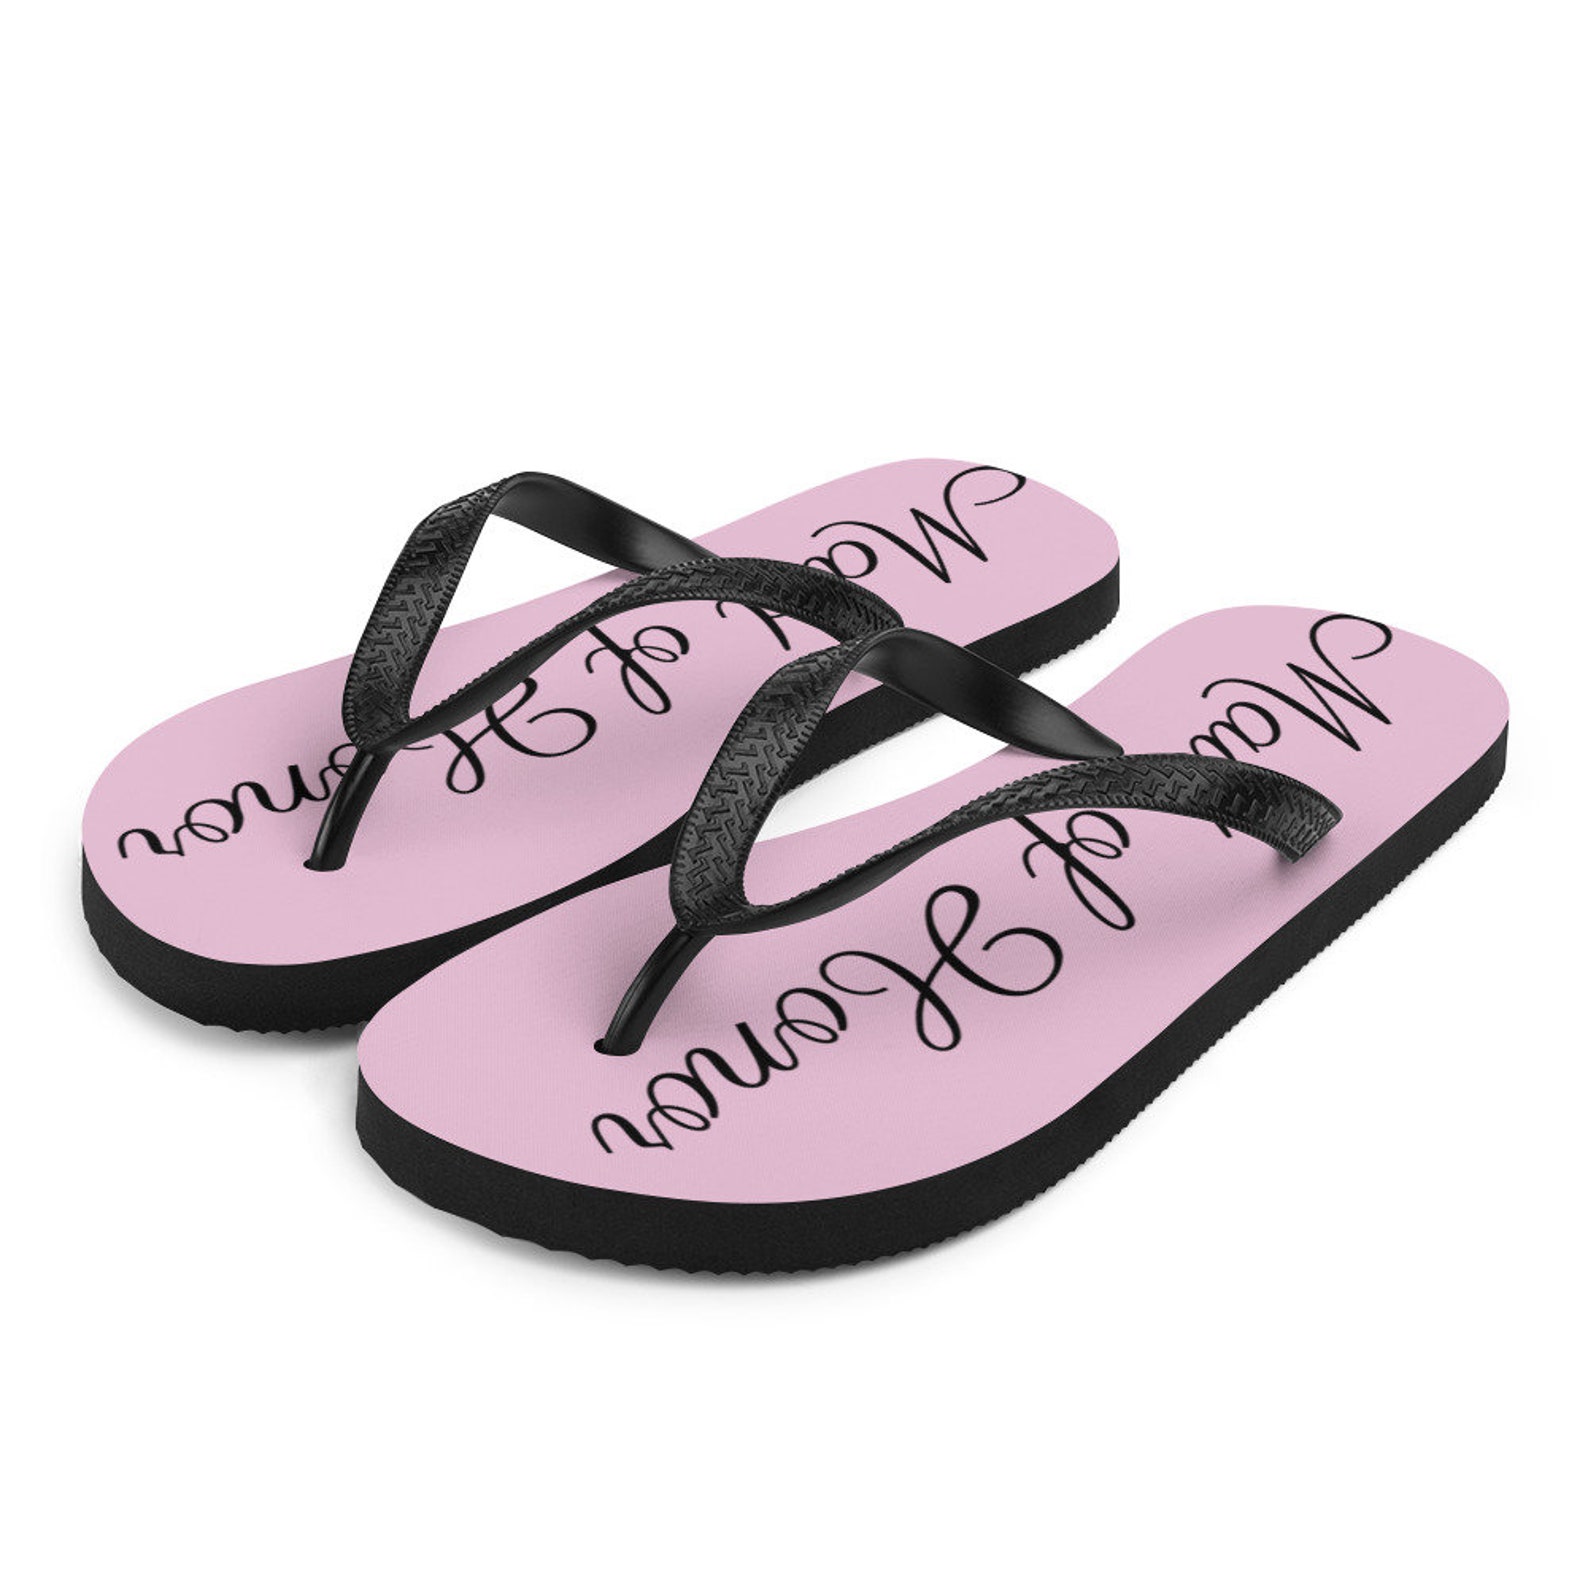 Maid of Honor Flip-flops Maid of Honor Sandals Wedding - Etsy